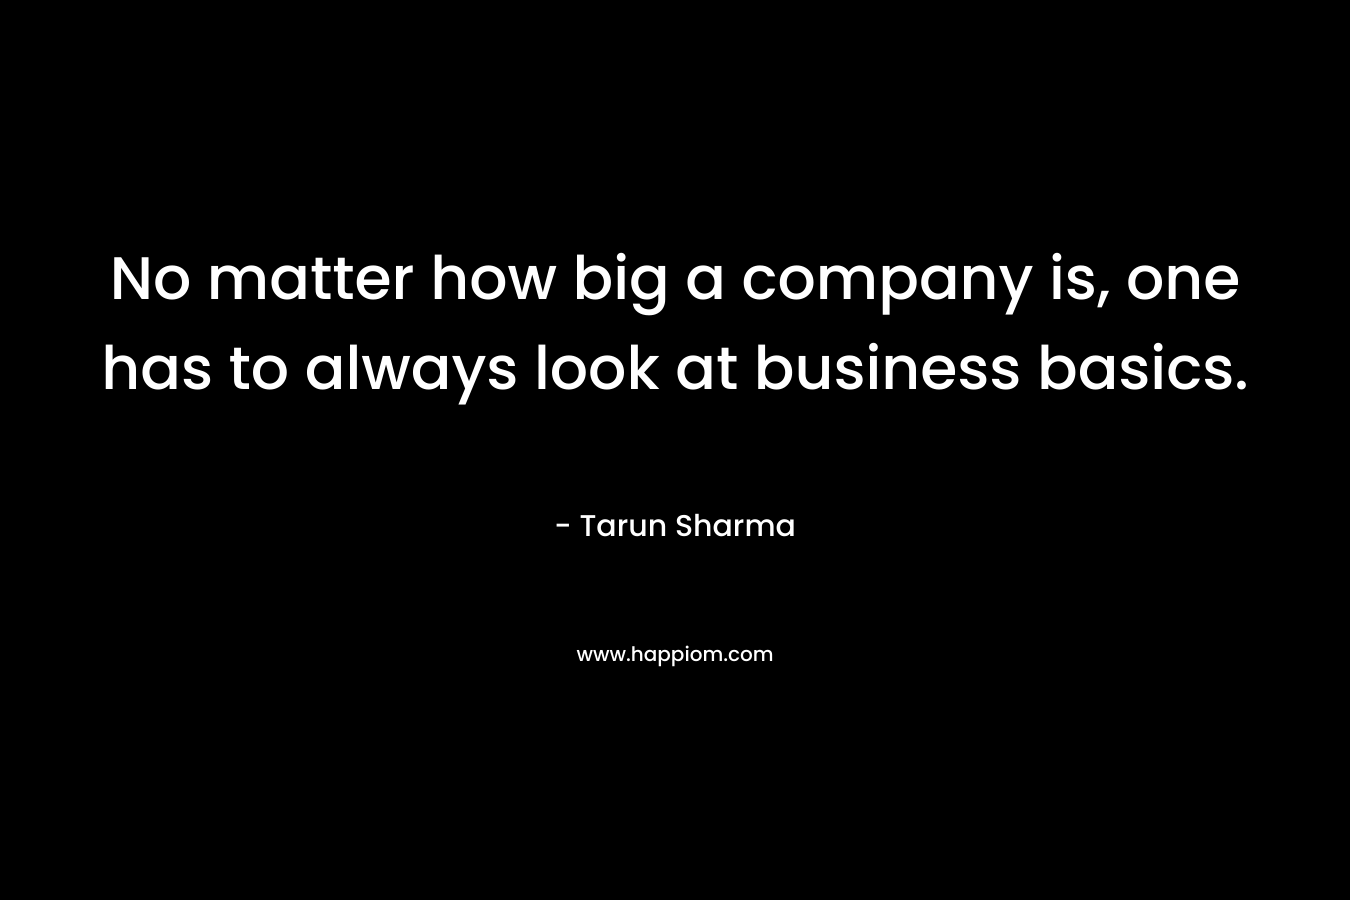 No matter how big a company is, one has to always look at business basics. – Tarun Sharma